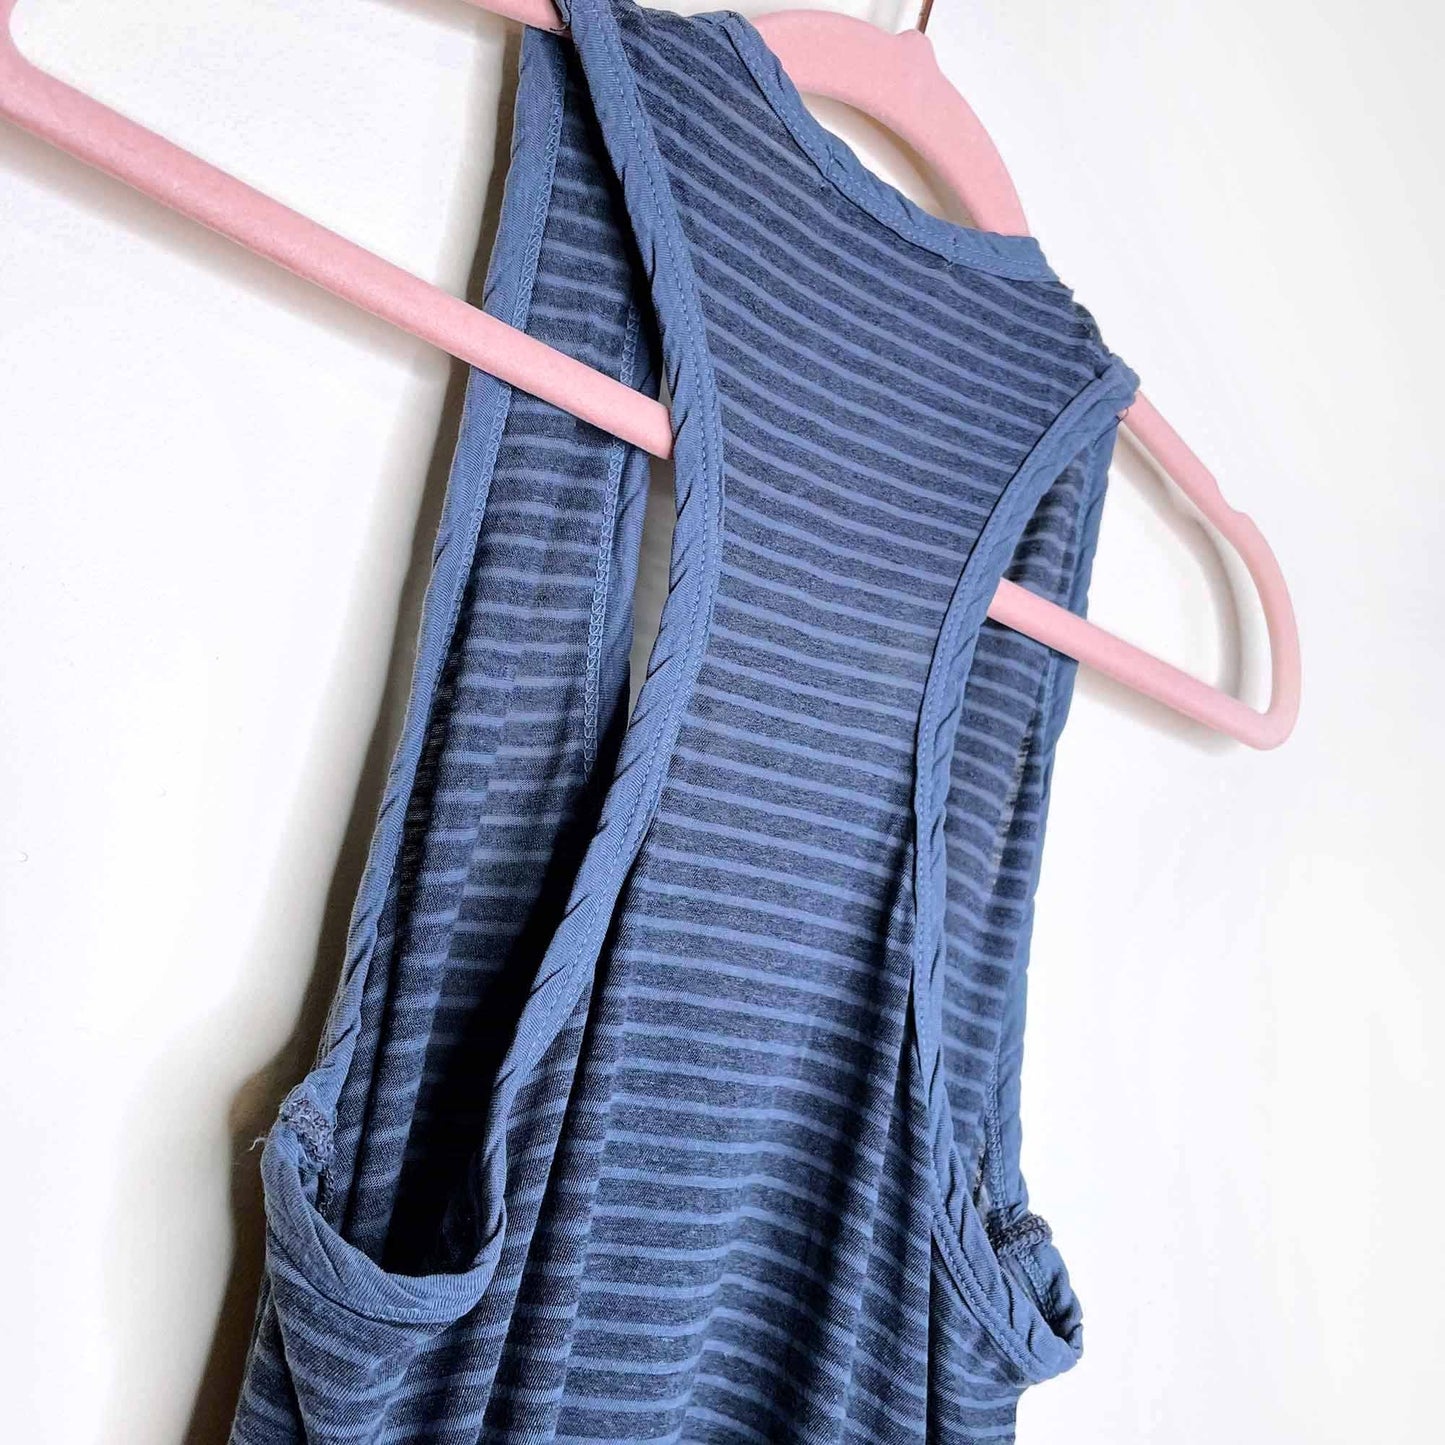 james perse striped ruched maxi tank dress - size 2 (med)